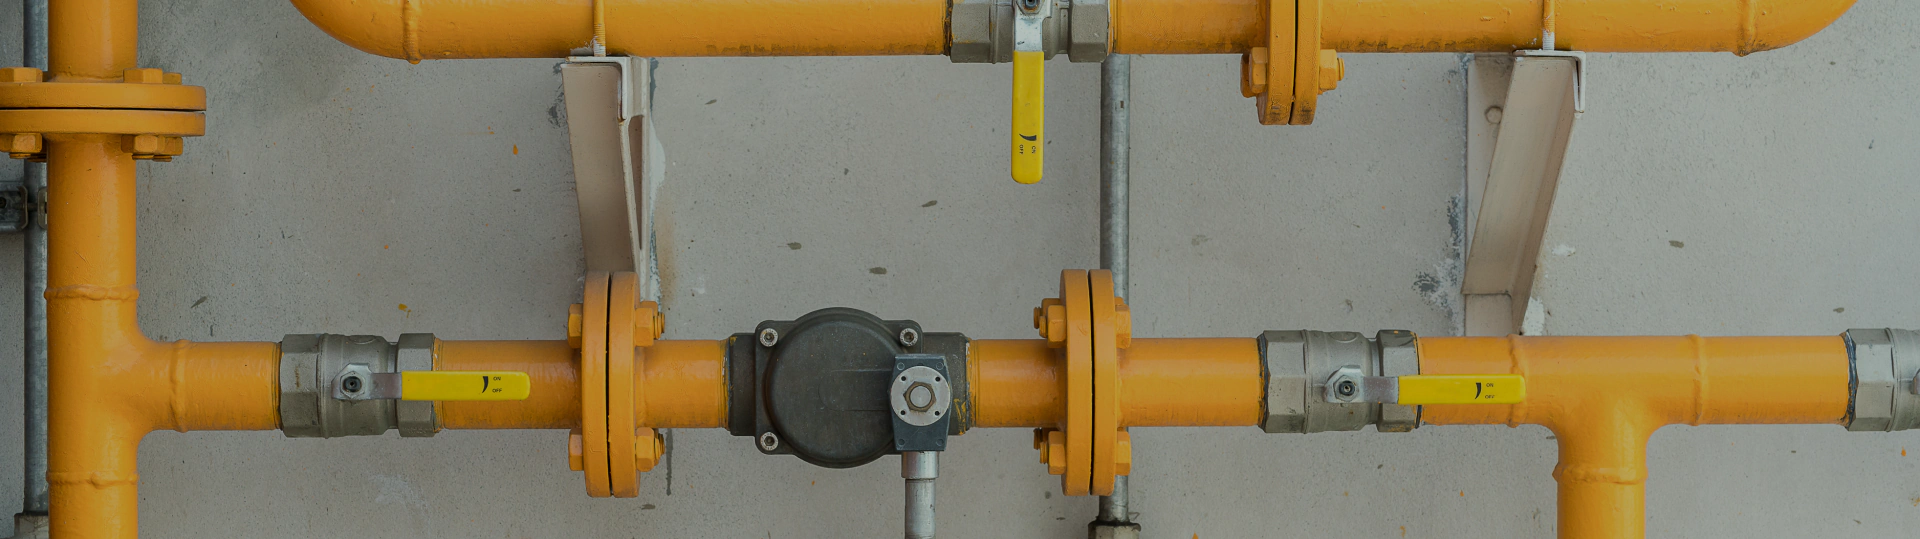 commercial gas line pipes